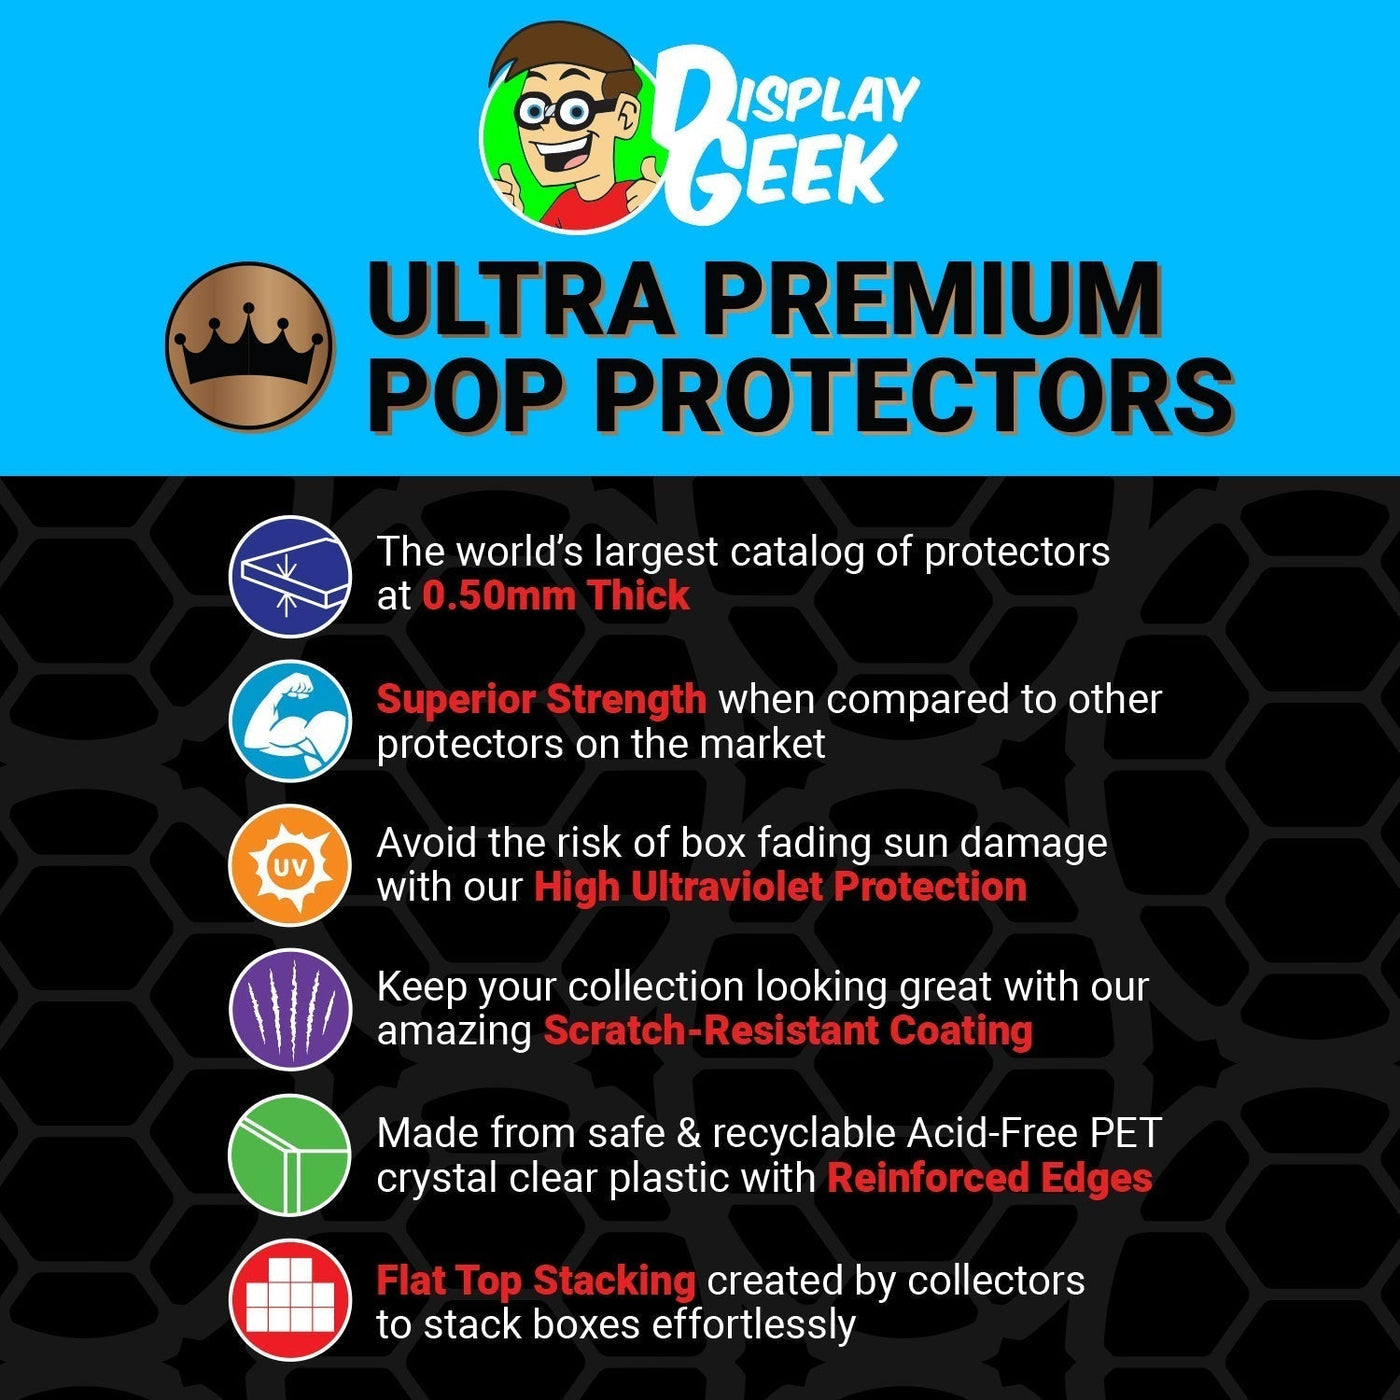 Pop Protector for Jiraiya on Toad #73 Funko Pop Rides on The Protector Guide App by Display Geek